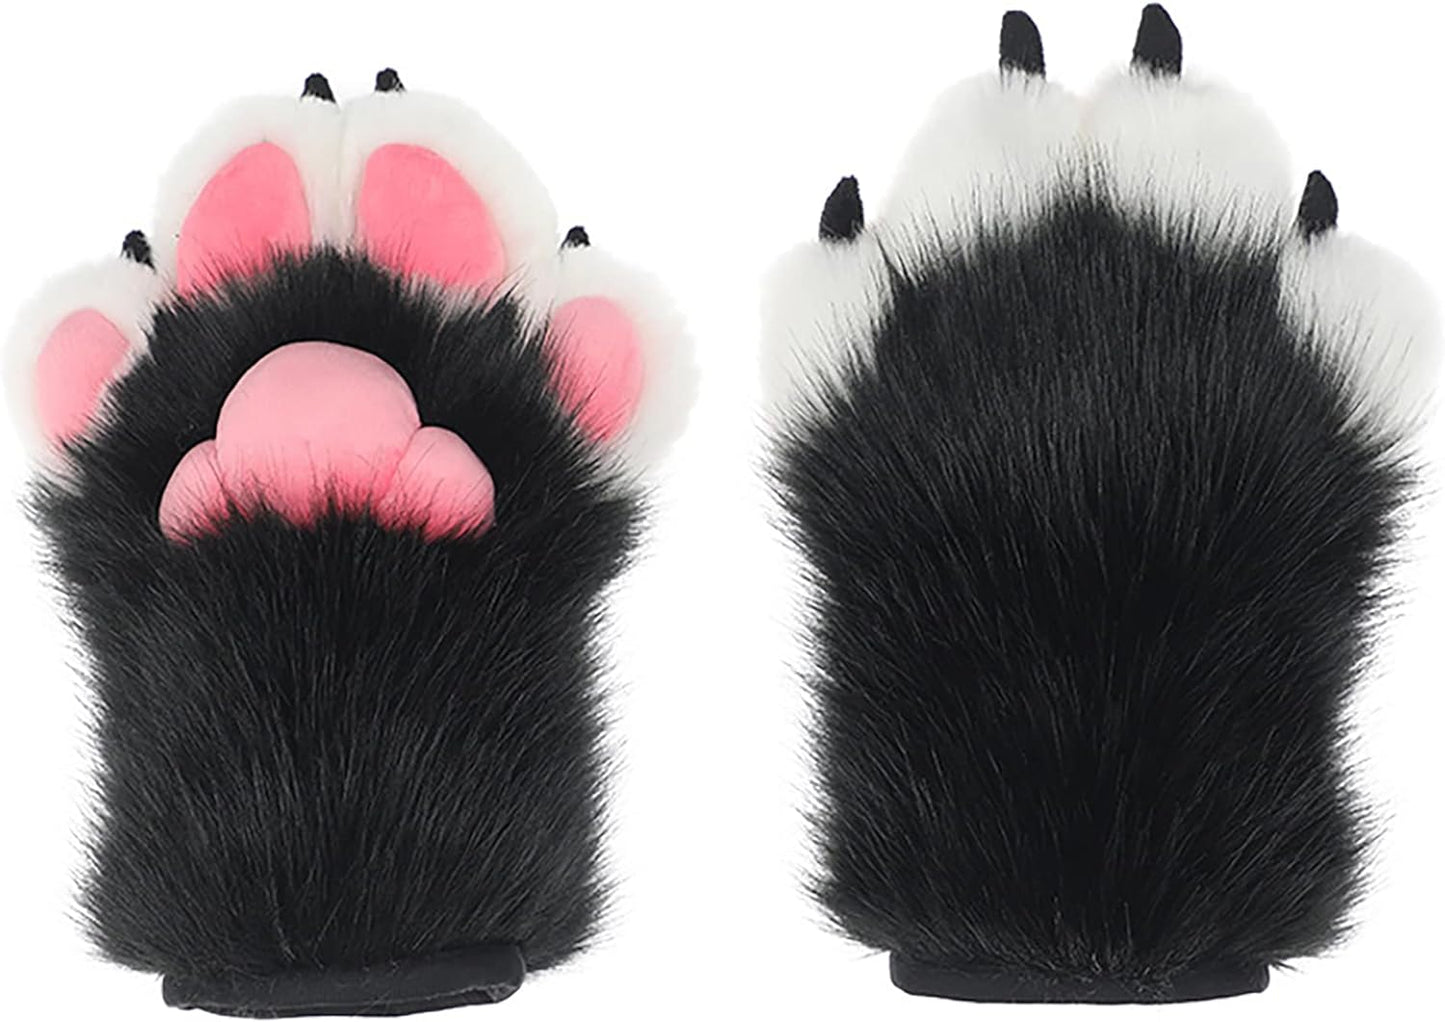 Wolf Fursuit Paws Built-in Whistle